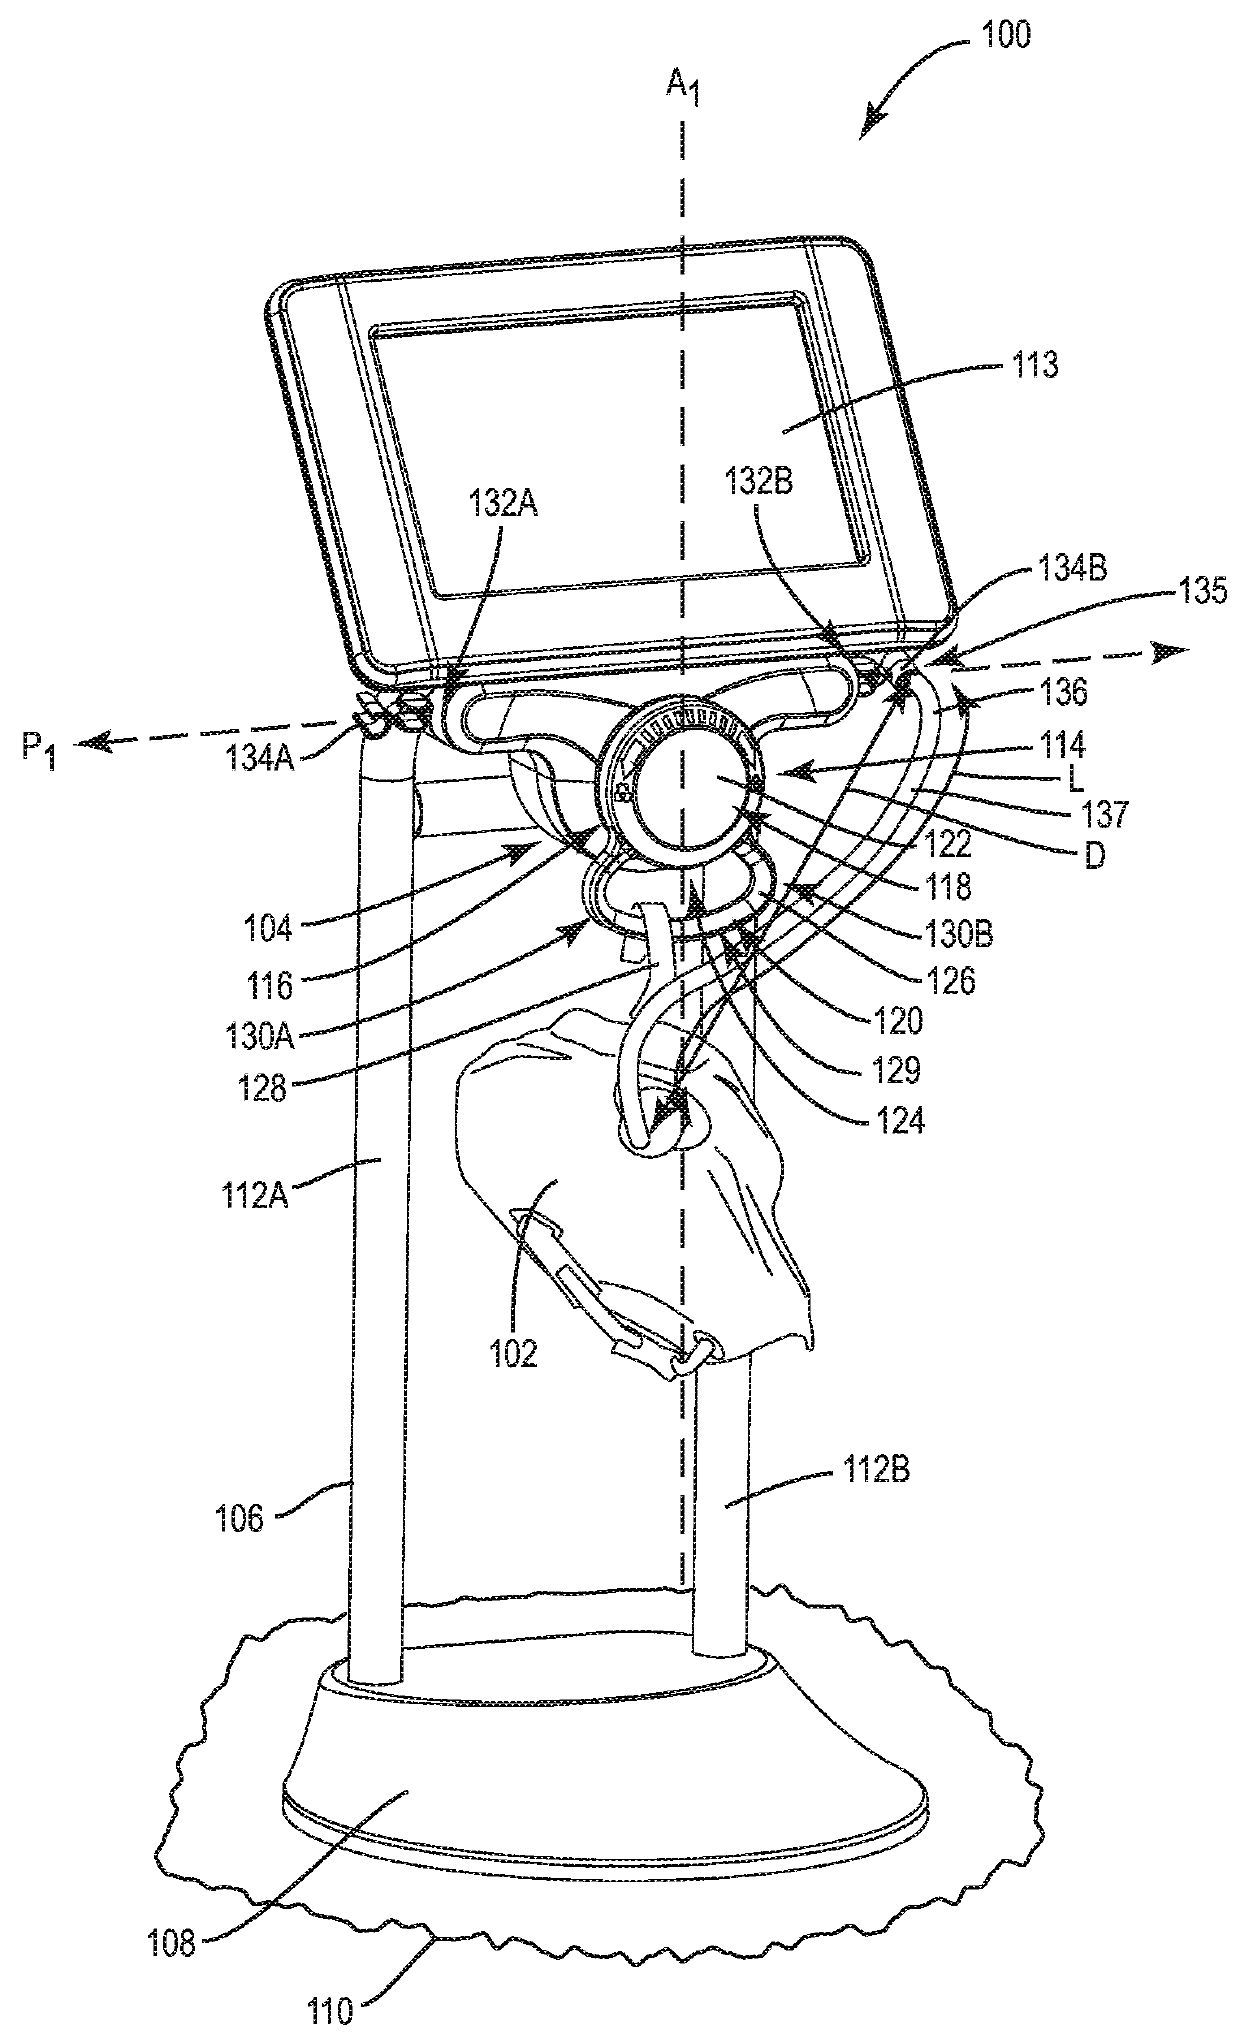 Fluid container measurement system employing load cell linkage member